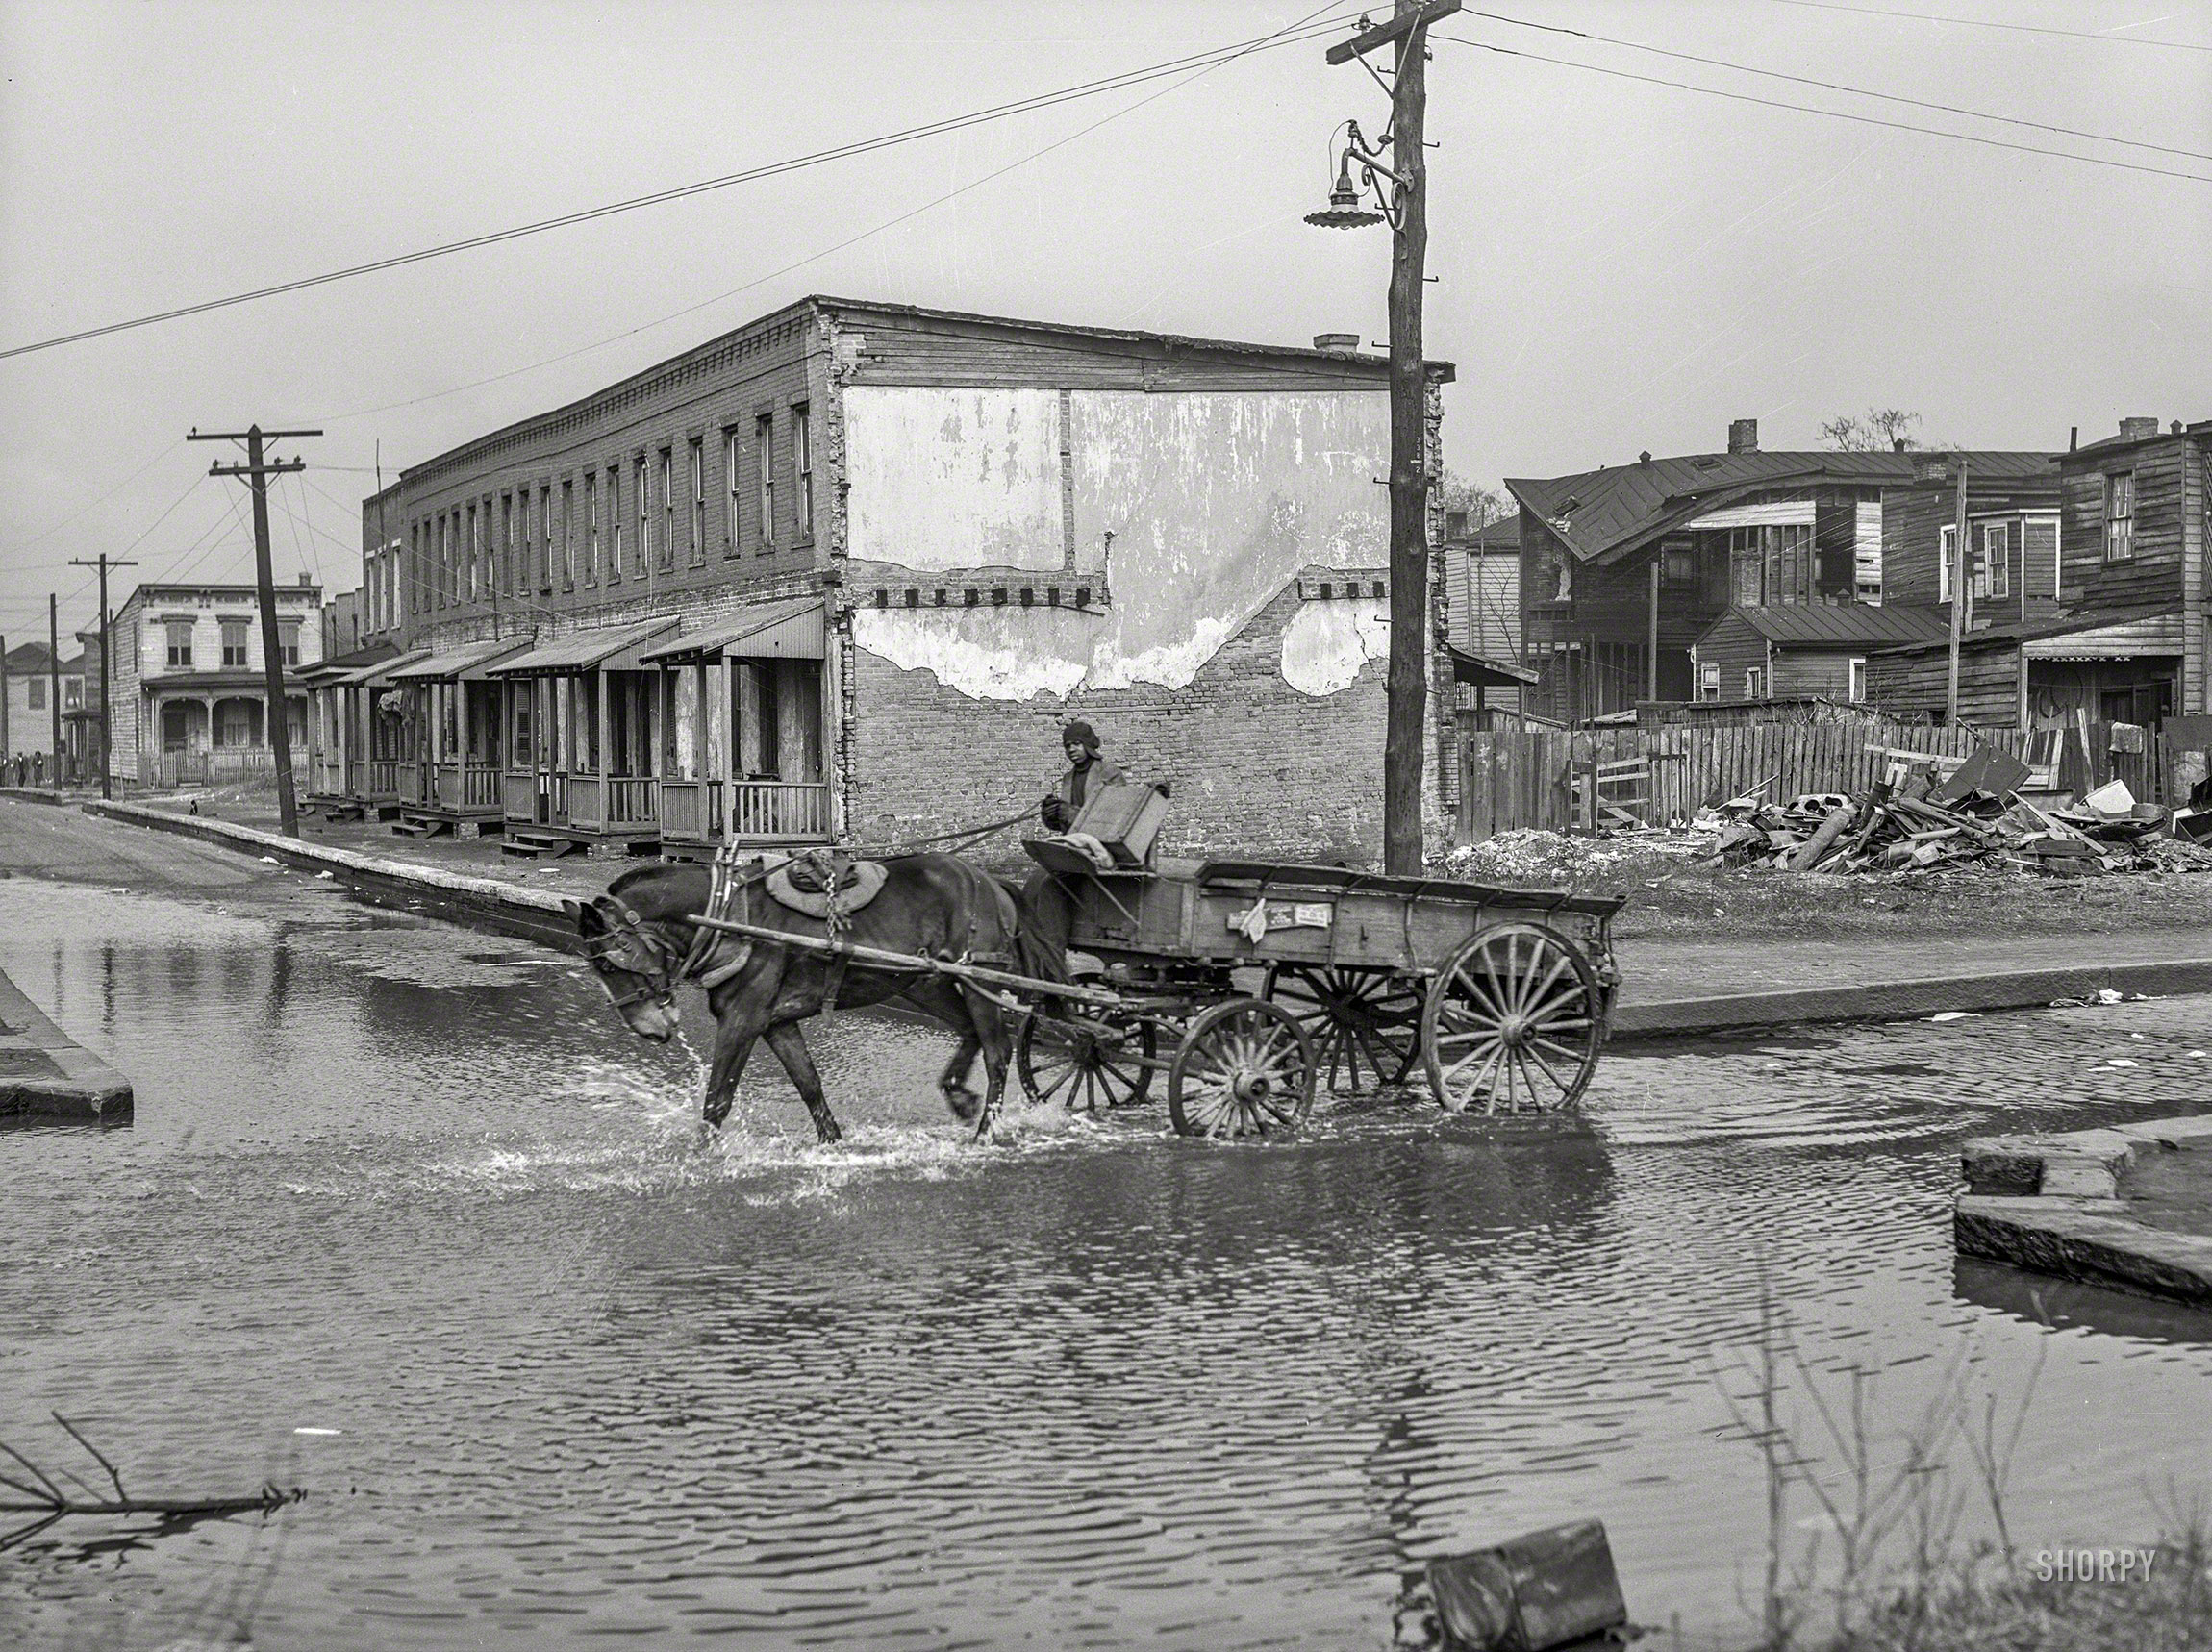 March 1941. "Backed up storm sewer in Negro slum district. Norfolk, Virginia." Photo by John Vachon for the Farm Security Administration. View full size.